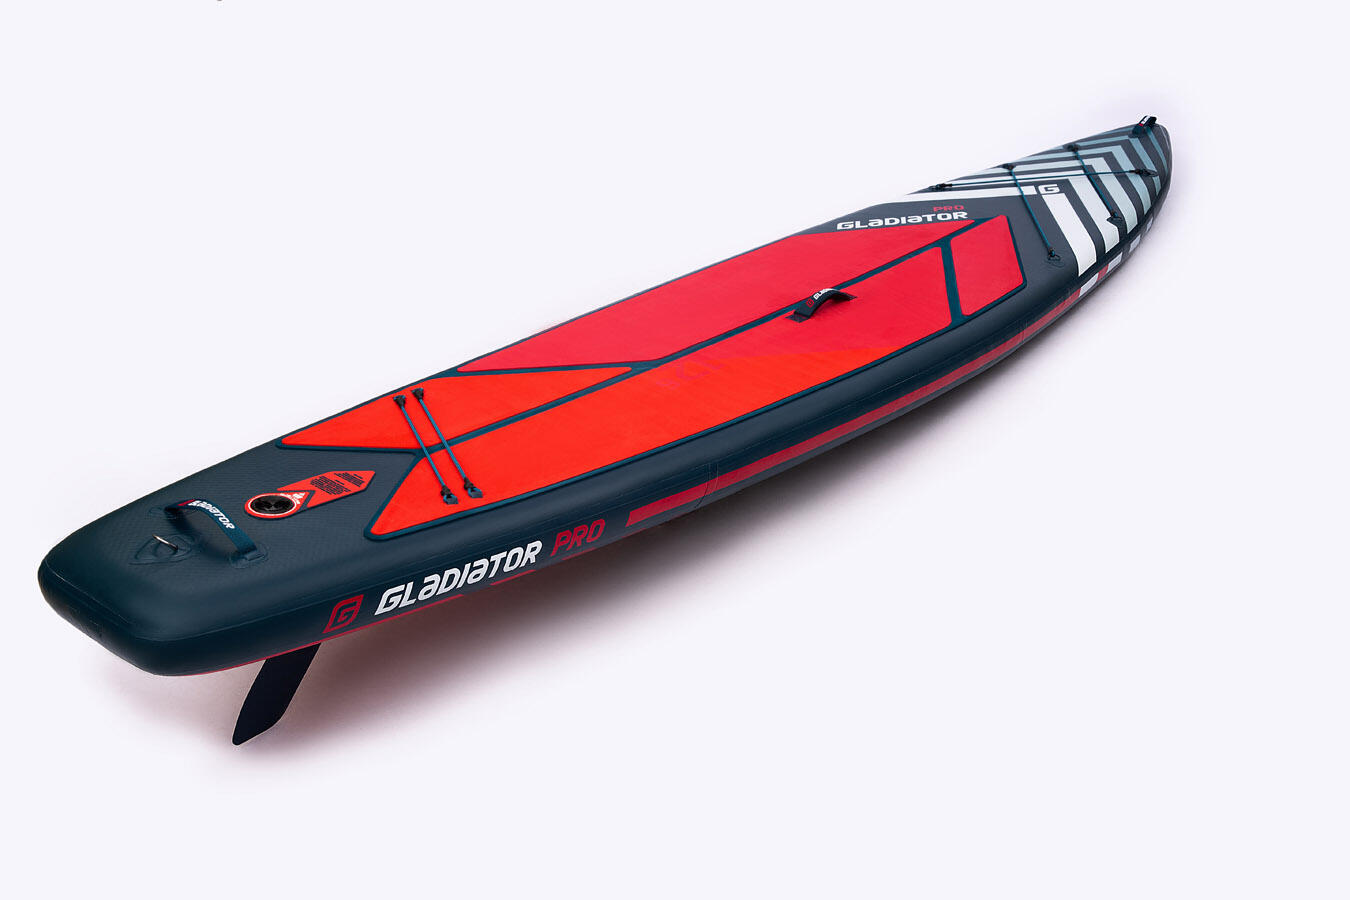 Pro 12'6 LIGHT INFLATABLE STAND UP PADDLE BOARD - RED 5/6